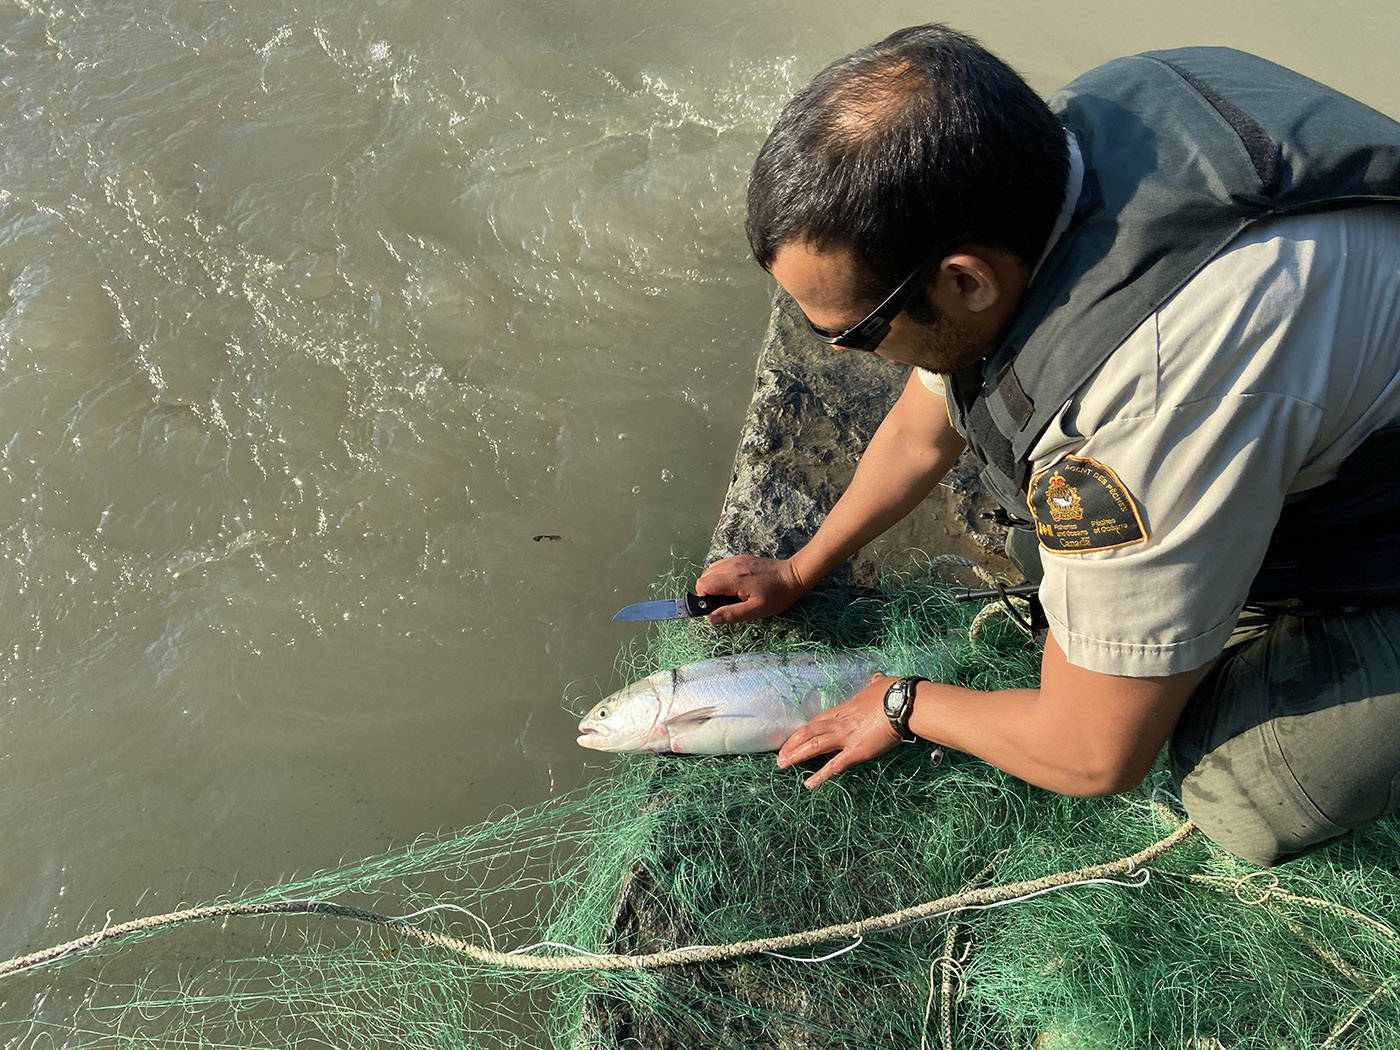 More than 200 illegal fishing nets seized on Fraser River by